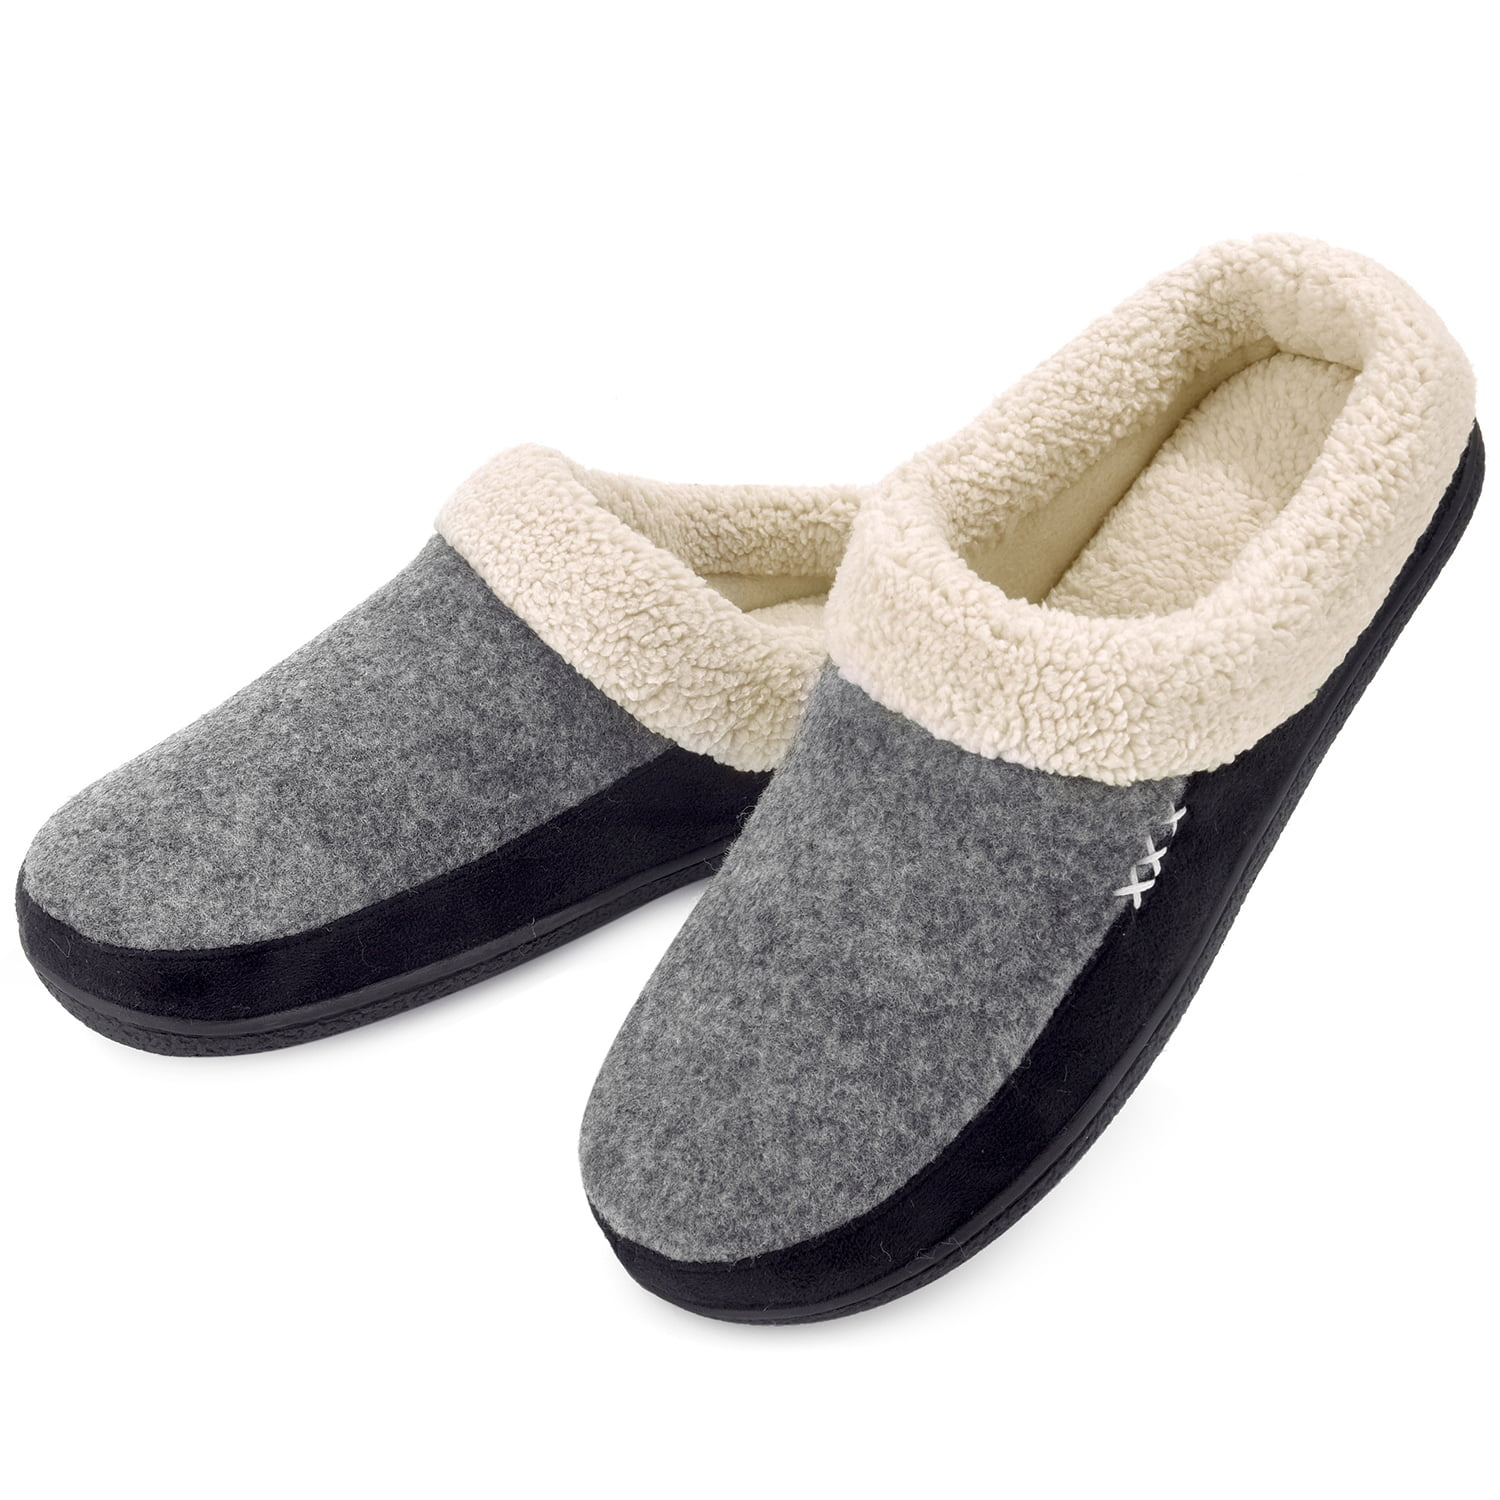 VONMAY - Vonmay Men's Slippers Fuzzy House Shoes Memory Foam Slip On ...